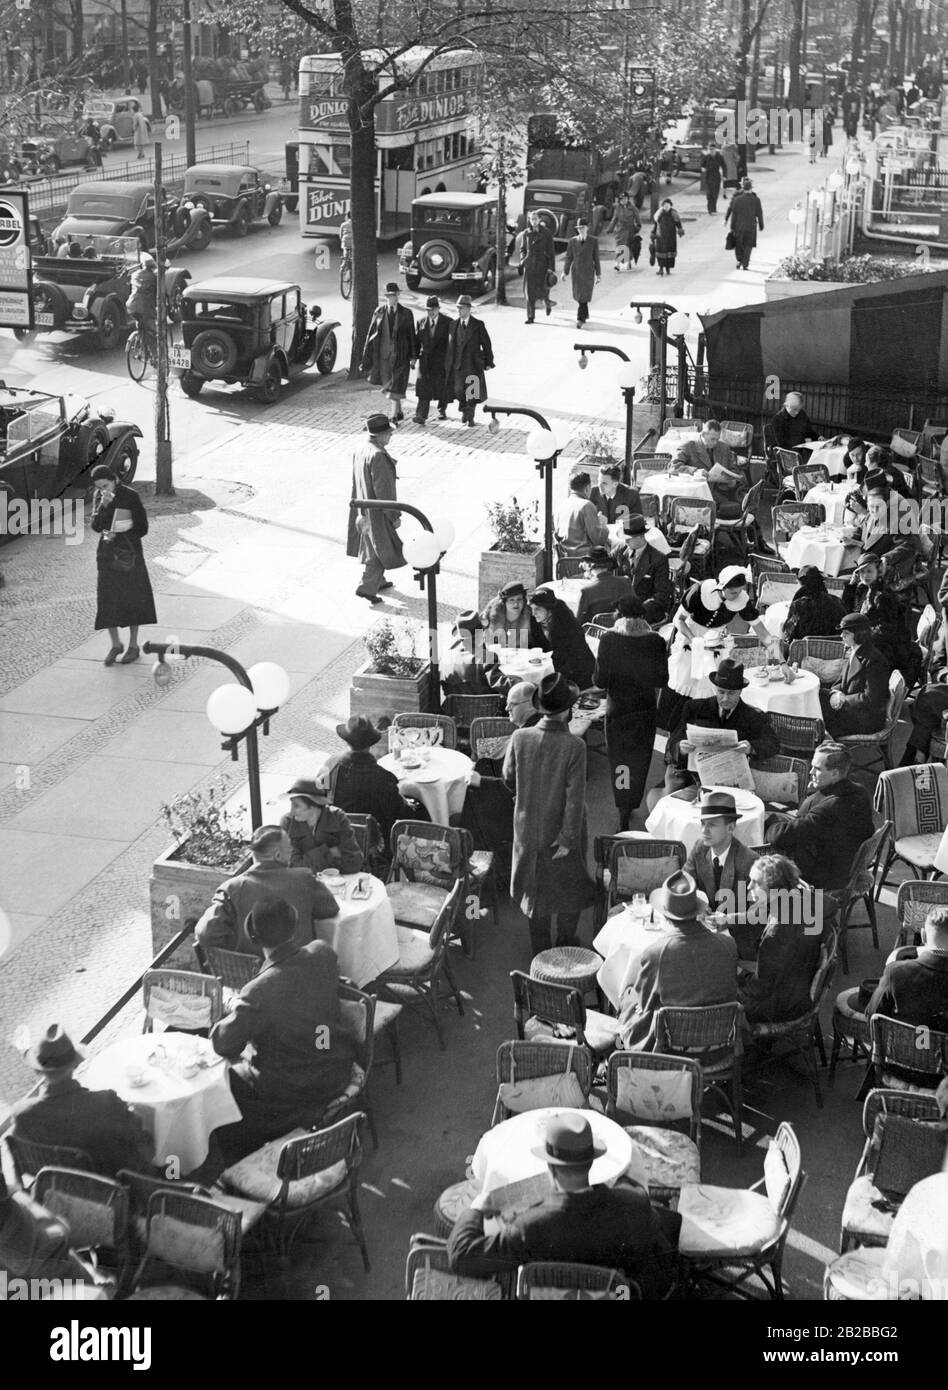 People sit on the terrace of Cafe Kranzler on the Kurfuerstendamm in Berlin. The outside area of the cafe is bordered by flower troughs, which are illuminated. On the left there is a double-decker bus, typical for Berlin. Stock Photo